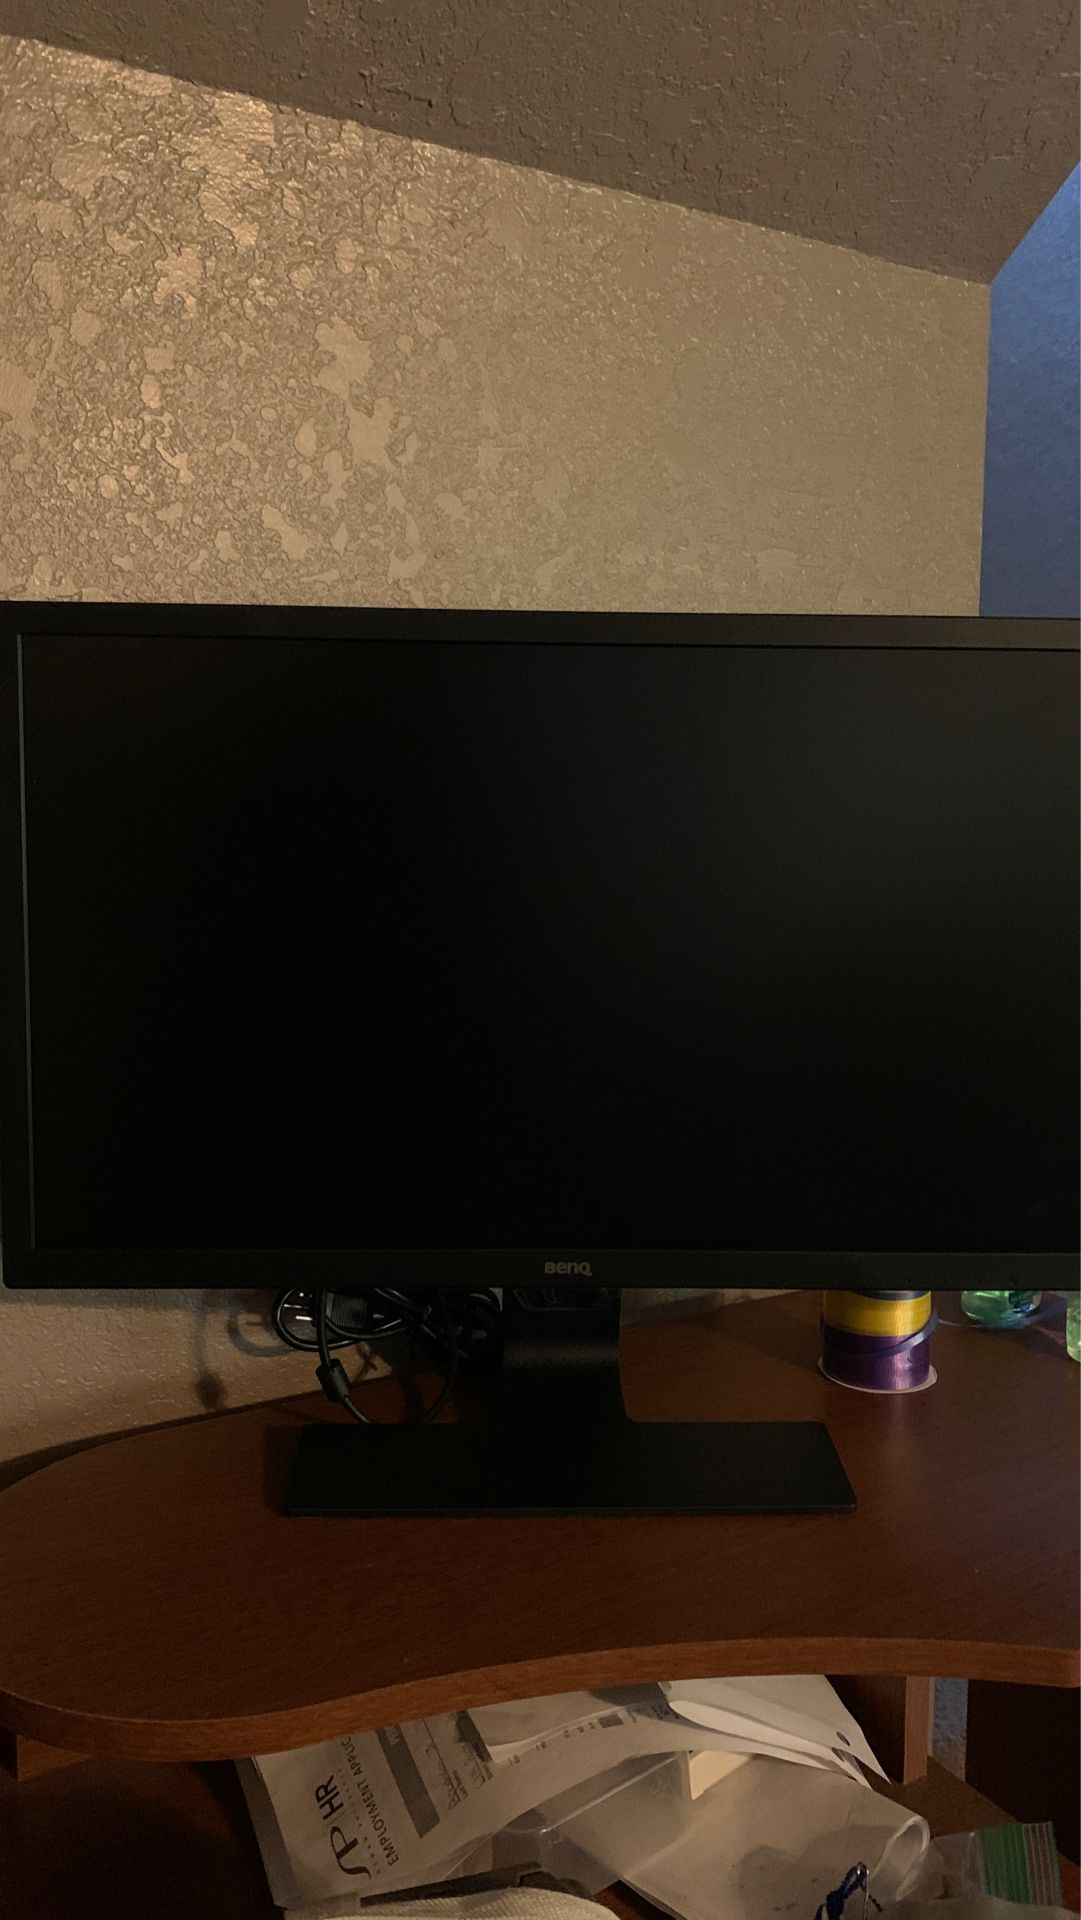 Brand new 24in gaming monitor